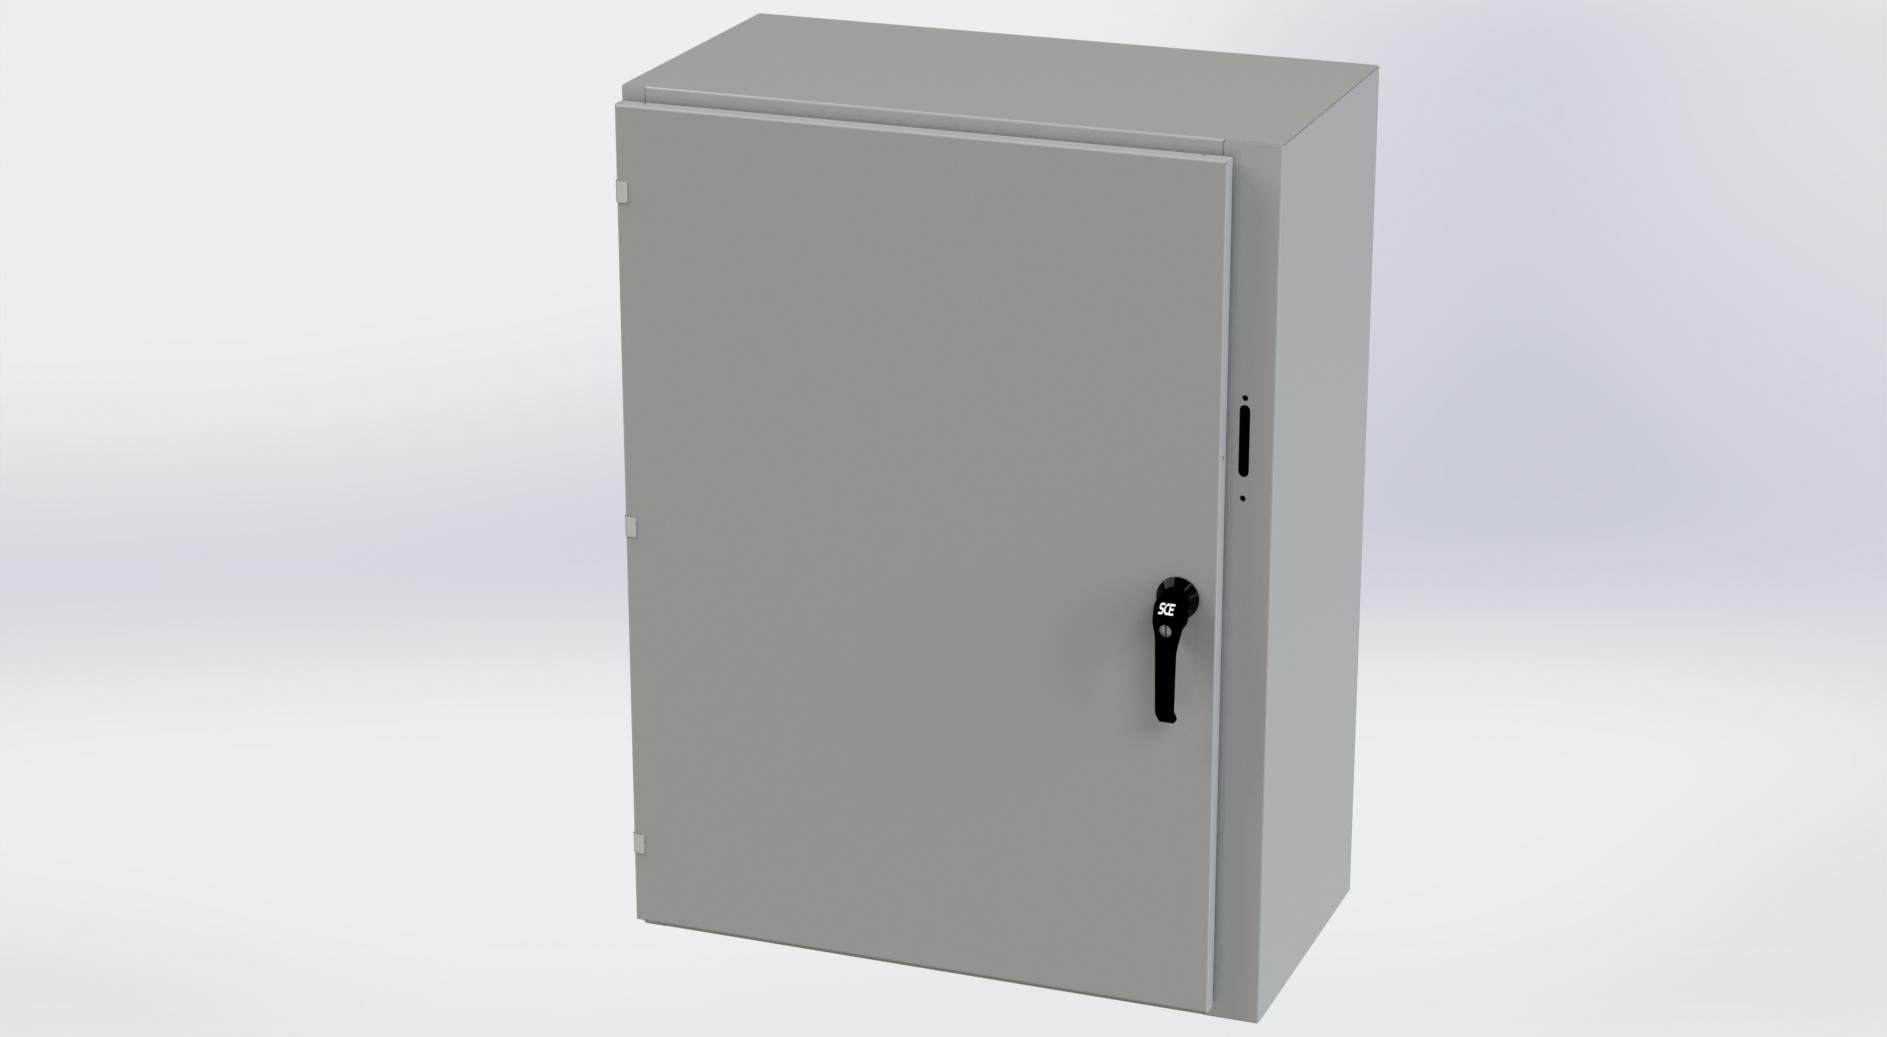 Saginaw Control SCE-42XEL3116LP XEL LP Enclosure, Height:42.00", Width:31.38", Depth:16.00", ANSI-61 gray powder coating inside and out. Optional sub-panels are powder coated white.